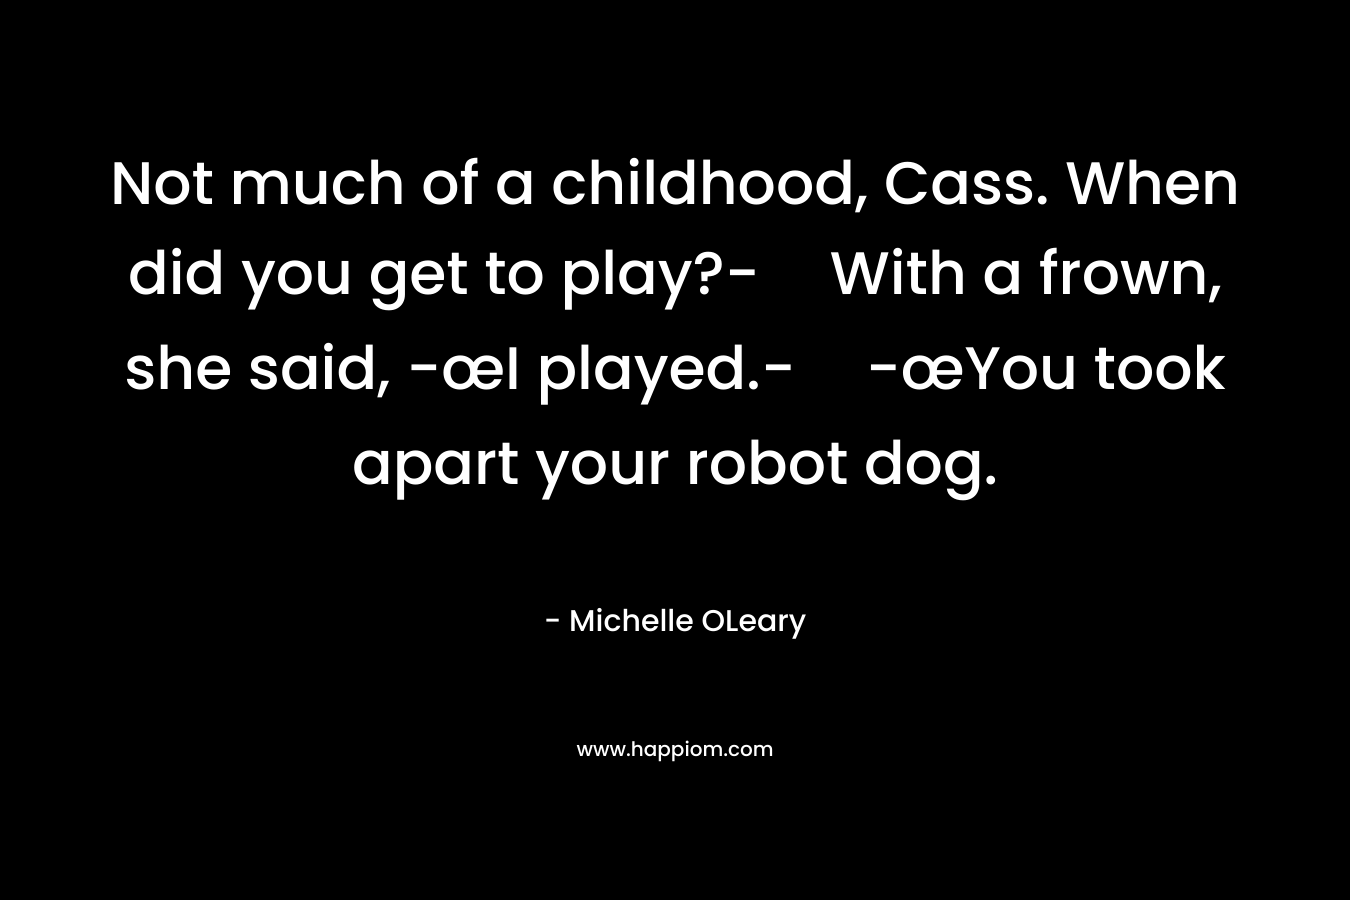 Not much of a childhood, Cass. When did you get to play?-With a frown, she said, -œI played.--œYou took apart your robot dog. – Michelle OLeary